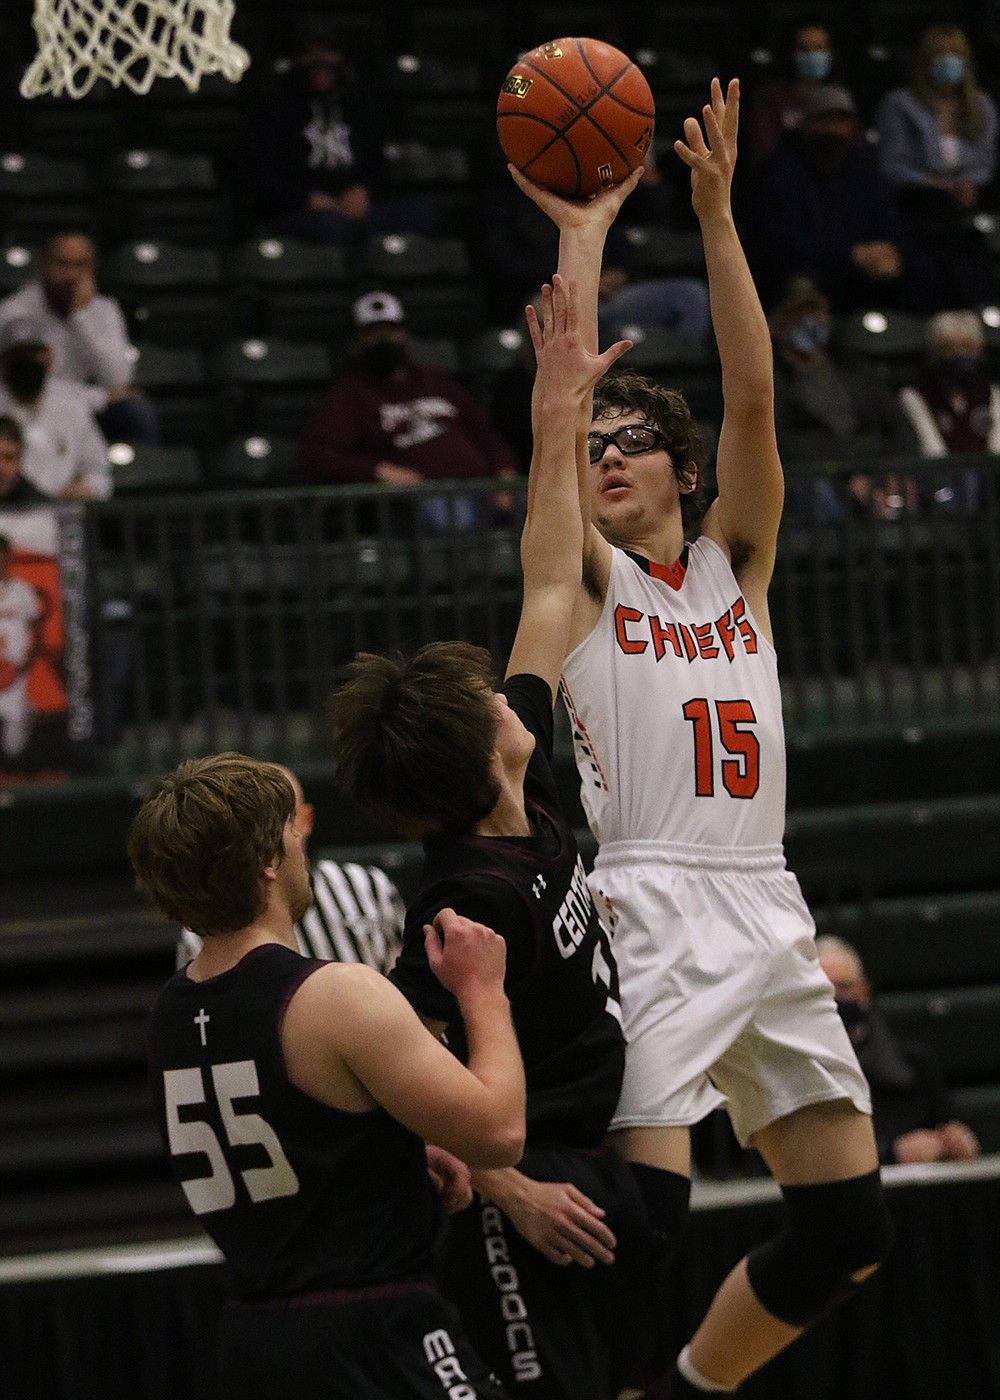 Payton Cates fires off a jumper in the tournament opener against Butte Central. (Courtesy of Bob Gunderson)